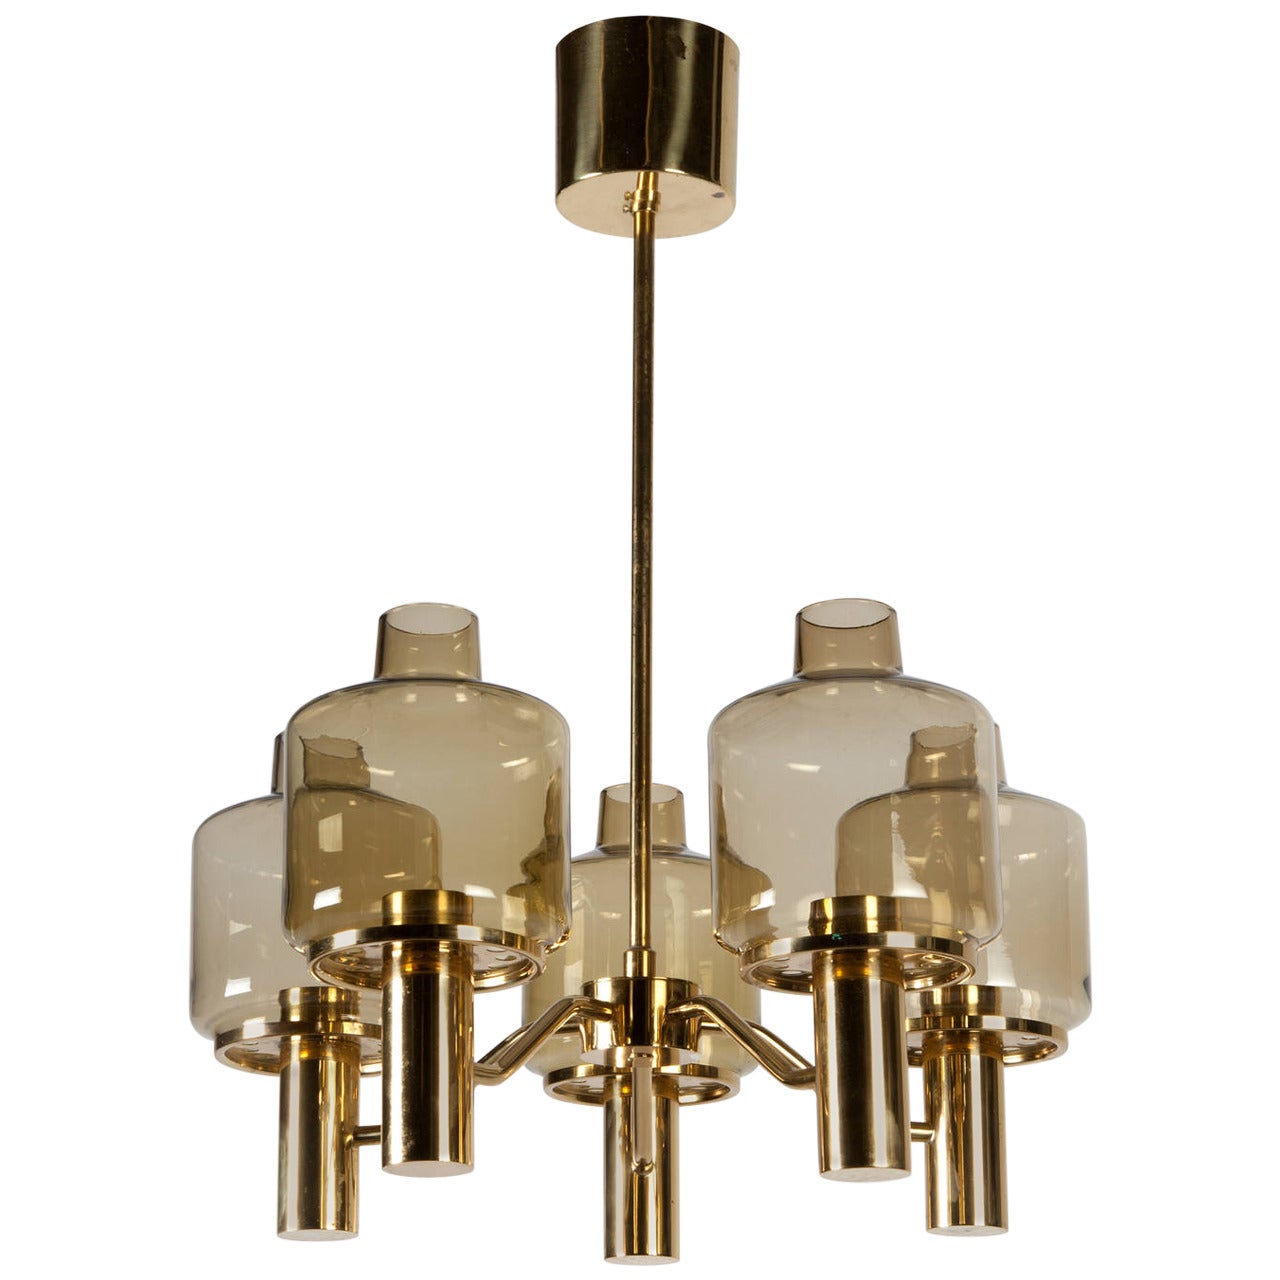 Brass and Glass Chandelier by Swedish Maker Hans-Agne Jakobsson, Circa 1960